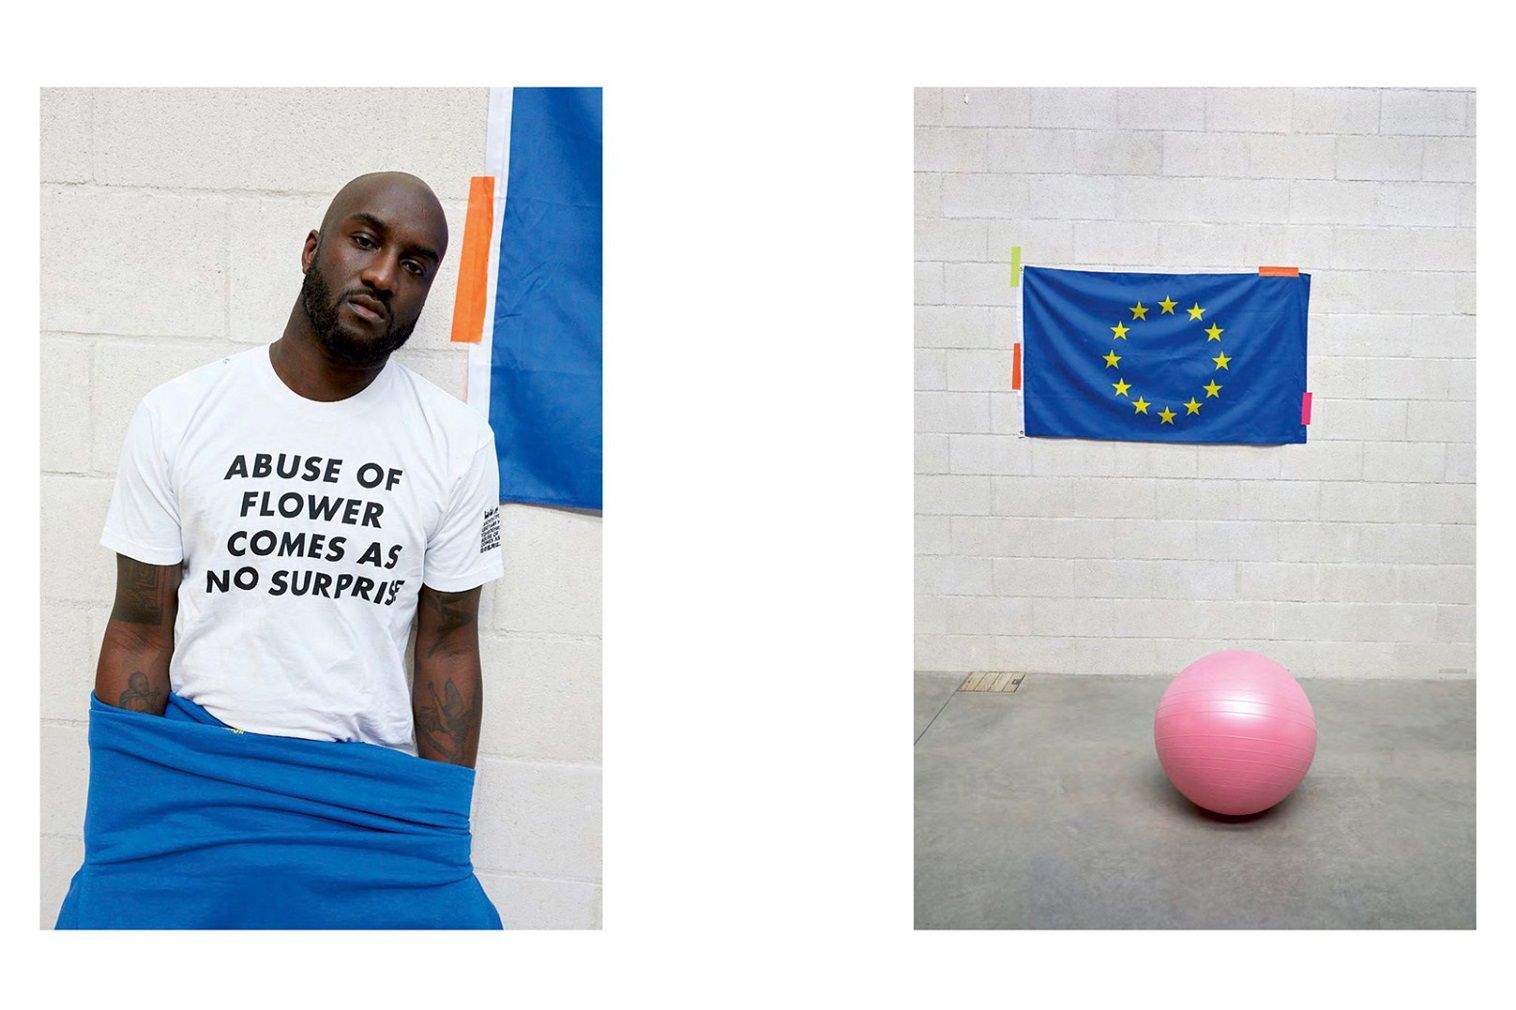 A preview of the collaboration between Virgil Abloh and IKEA